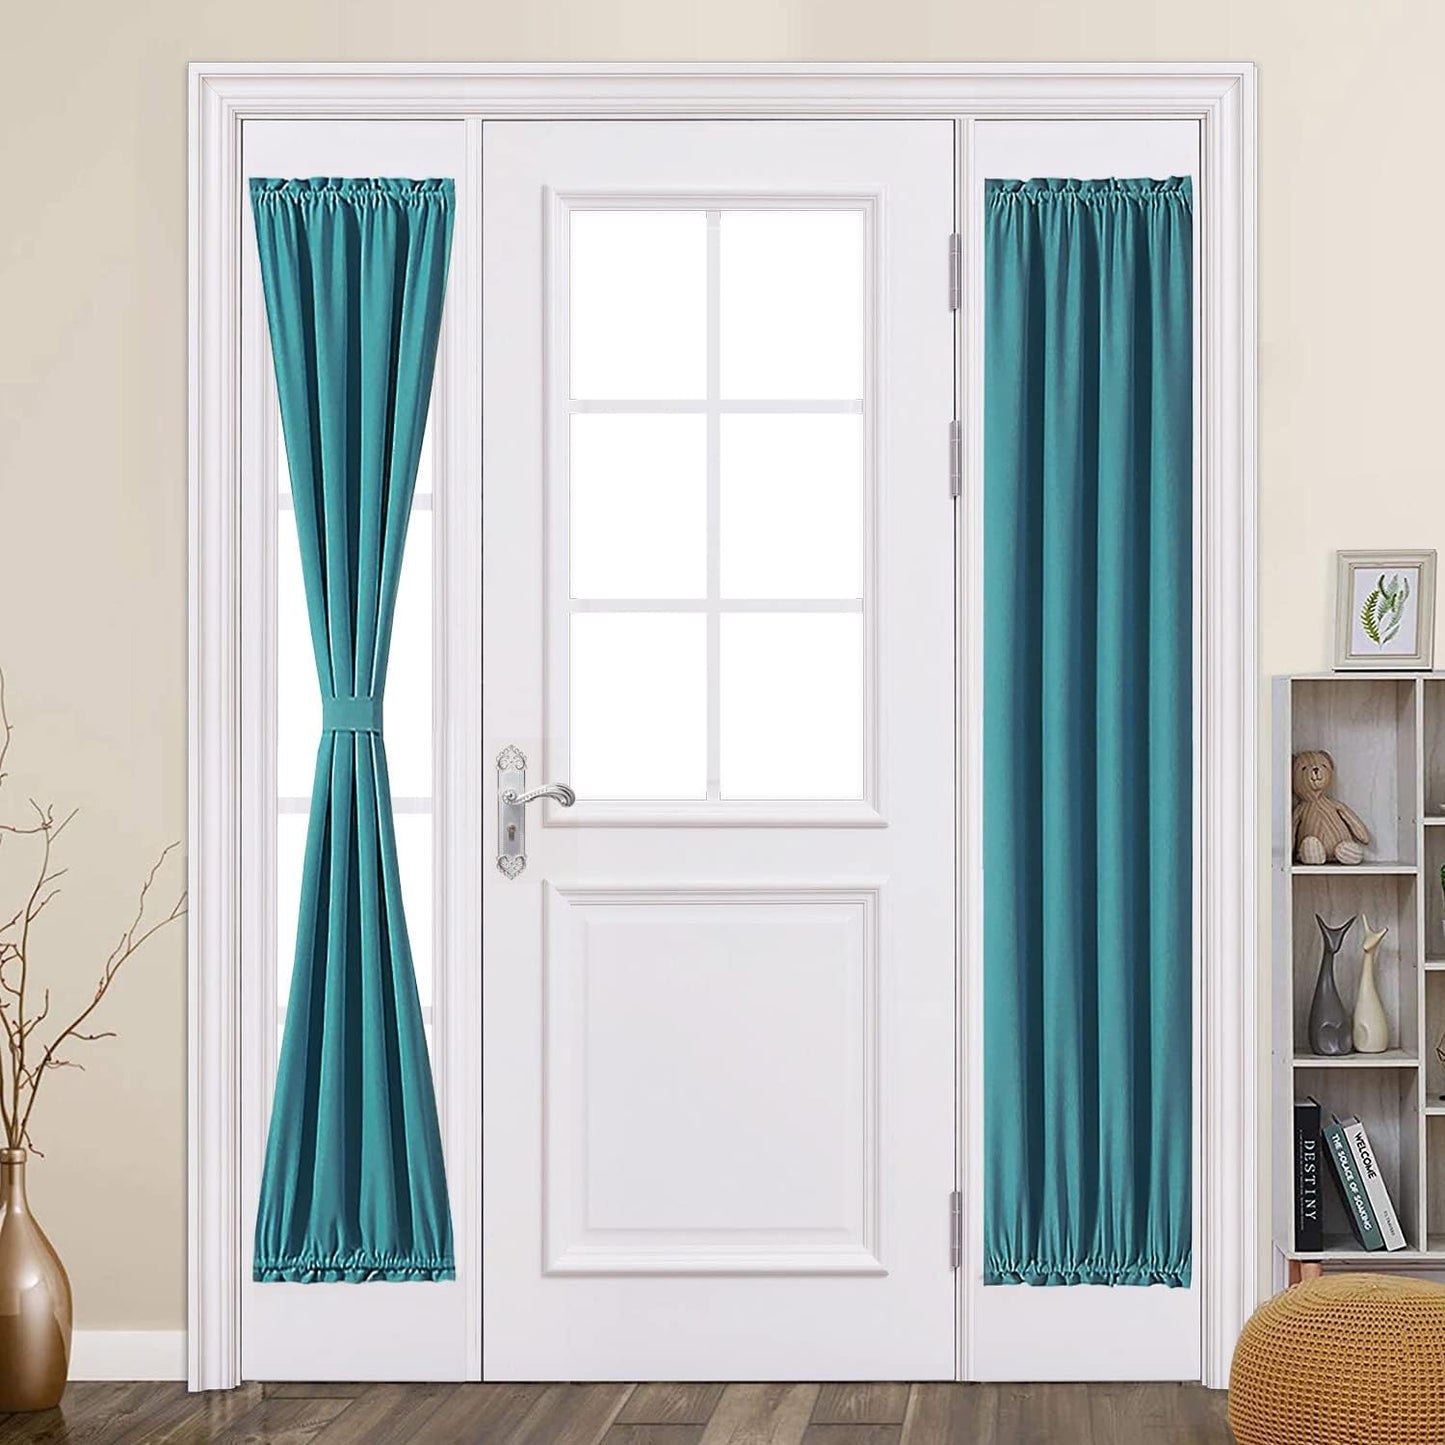 MIULEE Sidelight French Door Blackout Curtain Thermal Insulated Drapes Light Blocking Window Treatment Curtain for Narrow Glass Door Rod Pocket with Tieback 25 Inch by 72 Inch Black 1 Panel  MIULEE Turquoise Blue 72.00" X 25.00" 